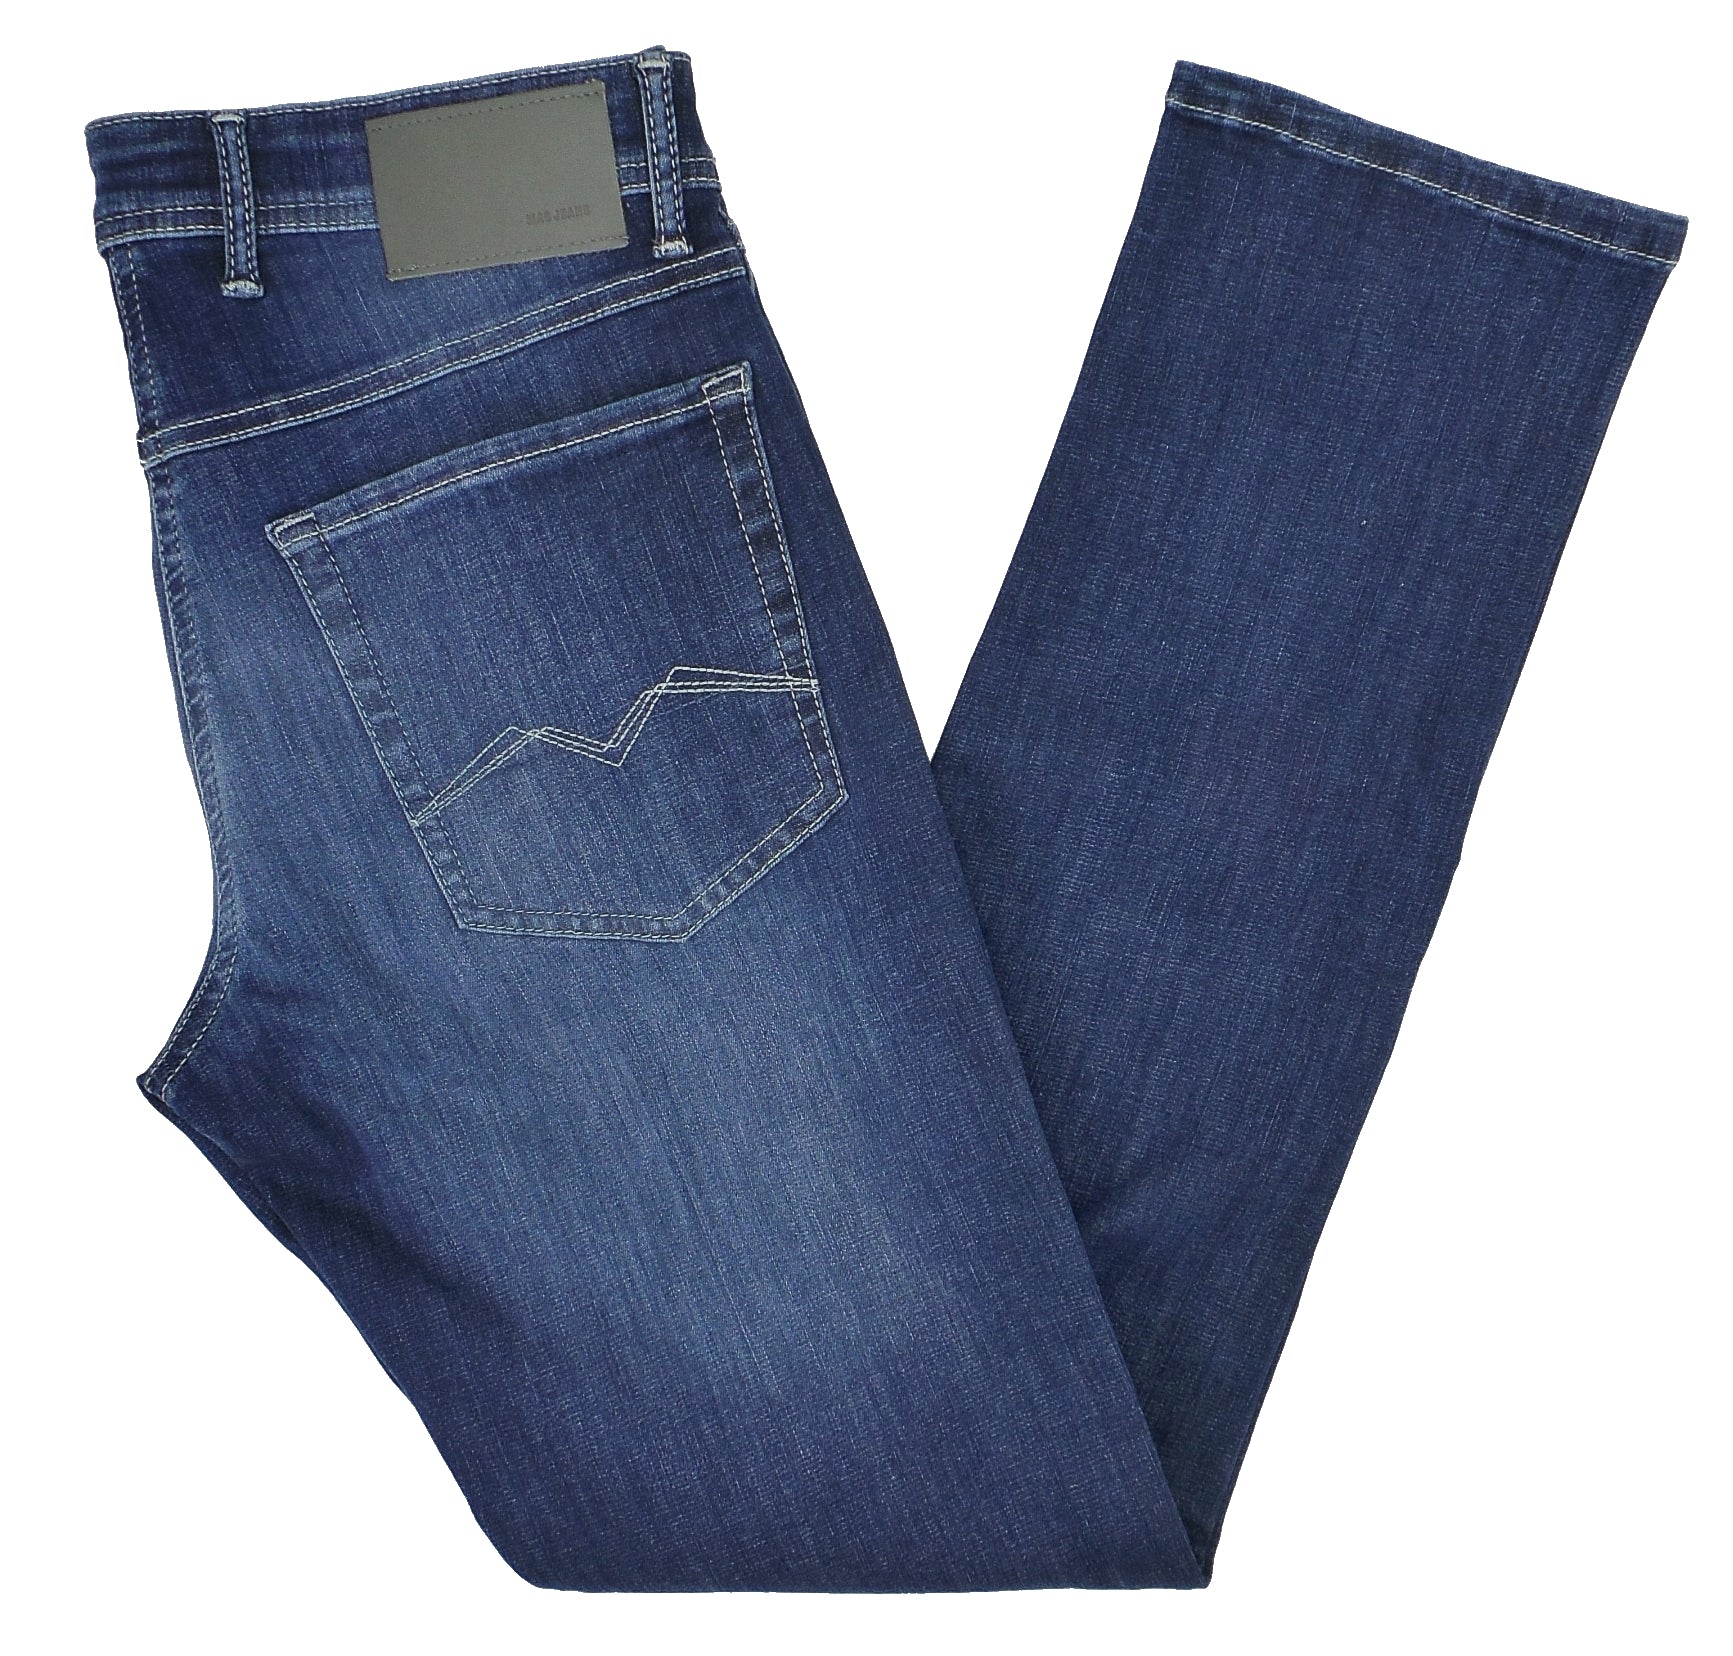 Buy Stylish Branded Jeans for Men Online in India